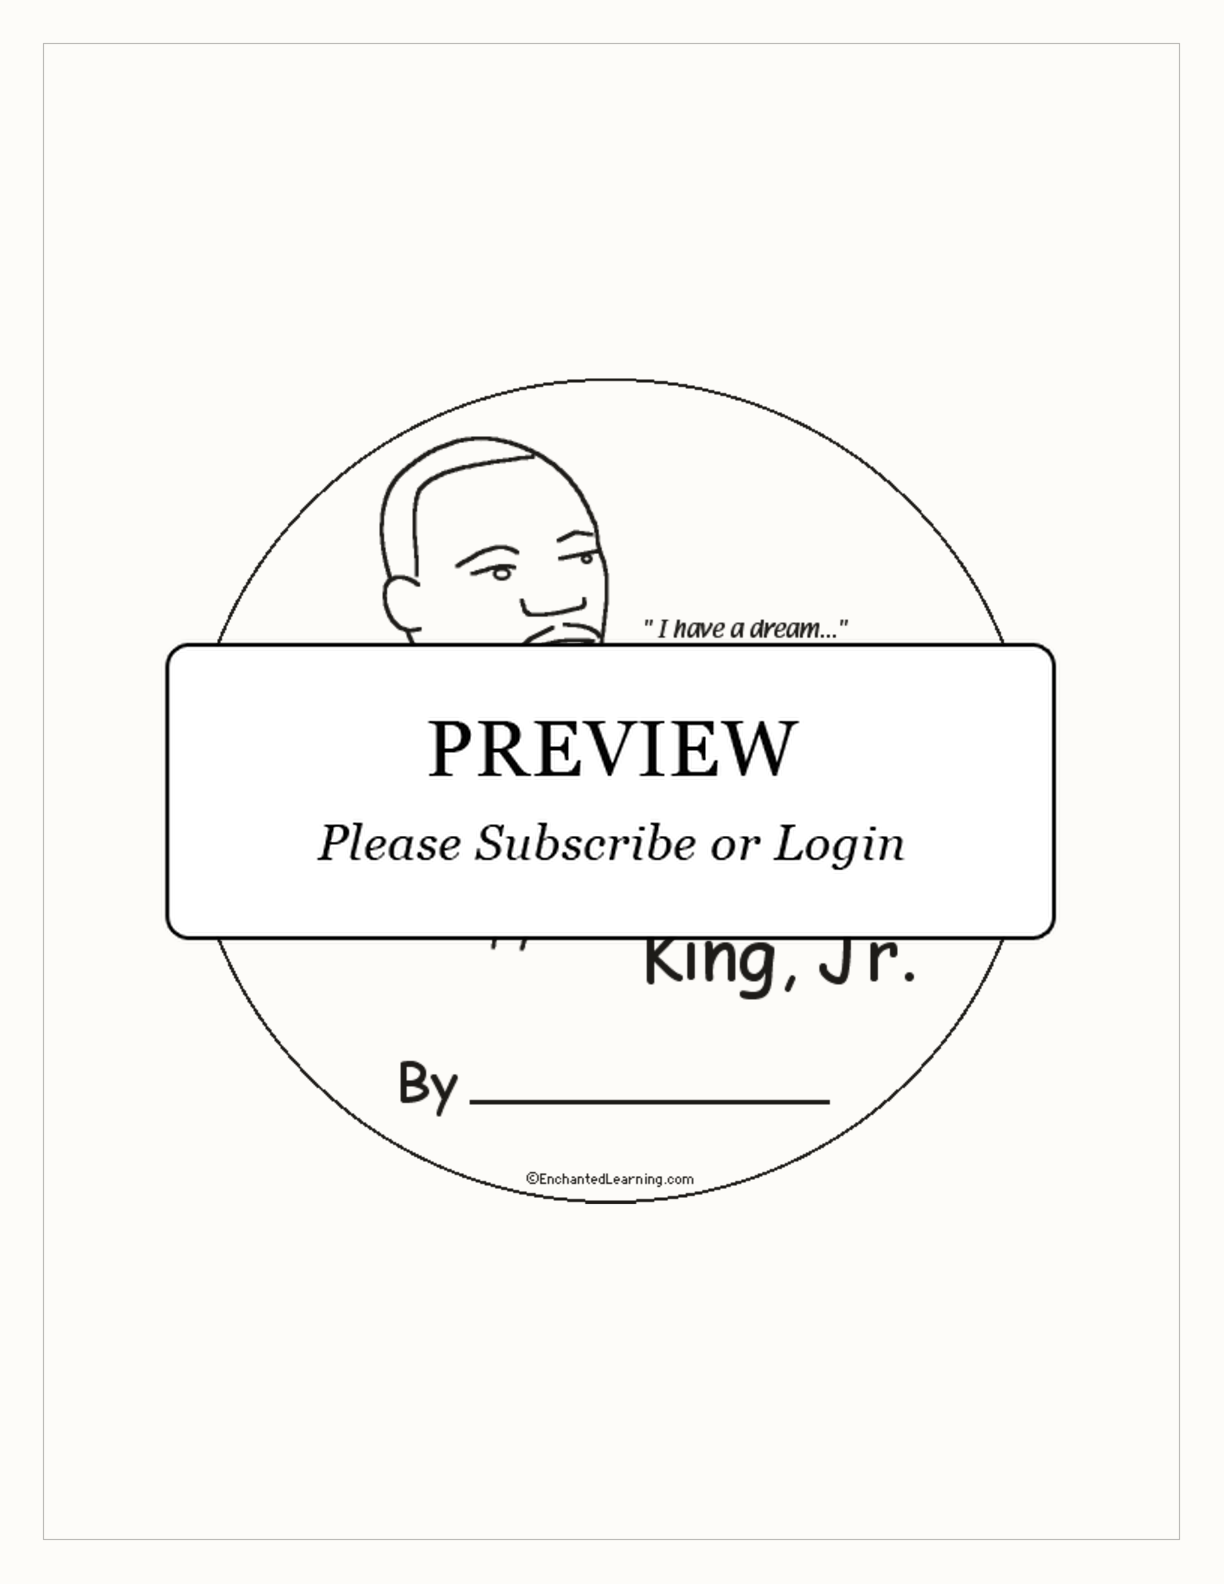 Martin Luther King, Jr., Fluent Reader Book interactive printout page 1